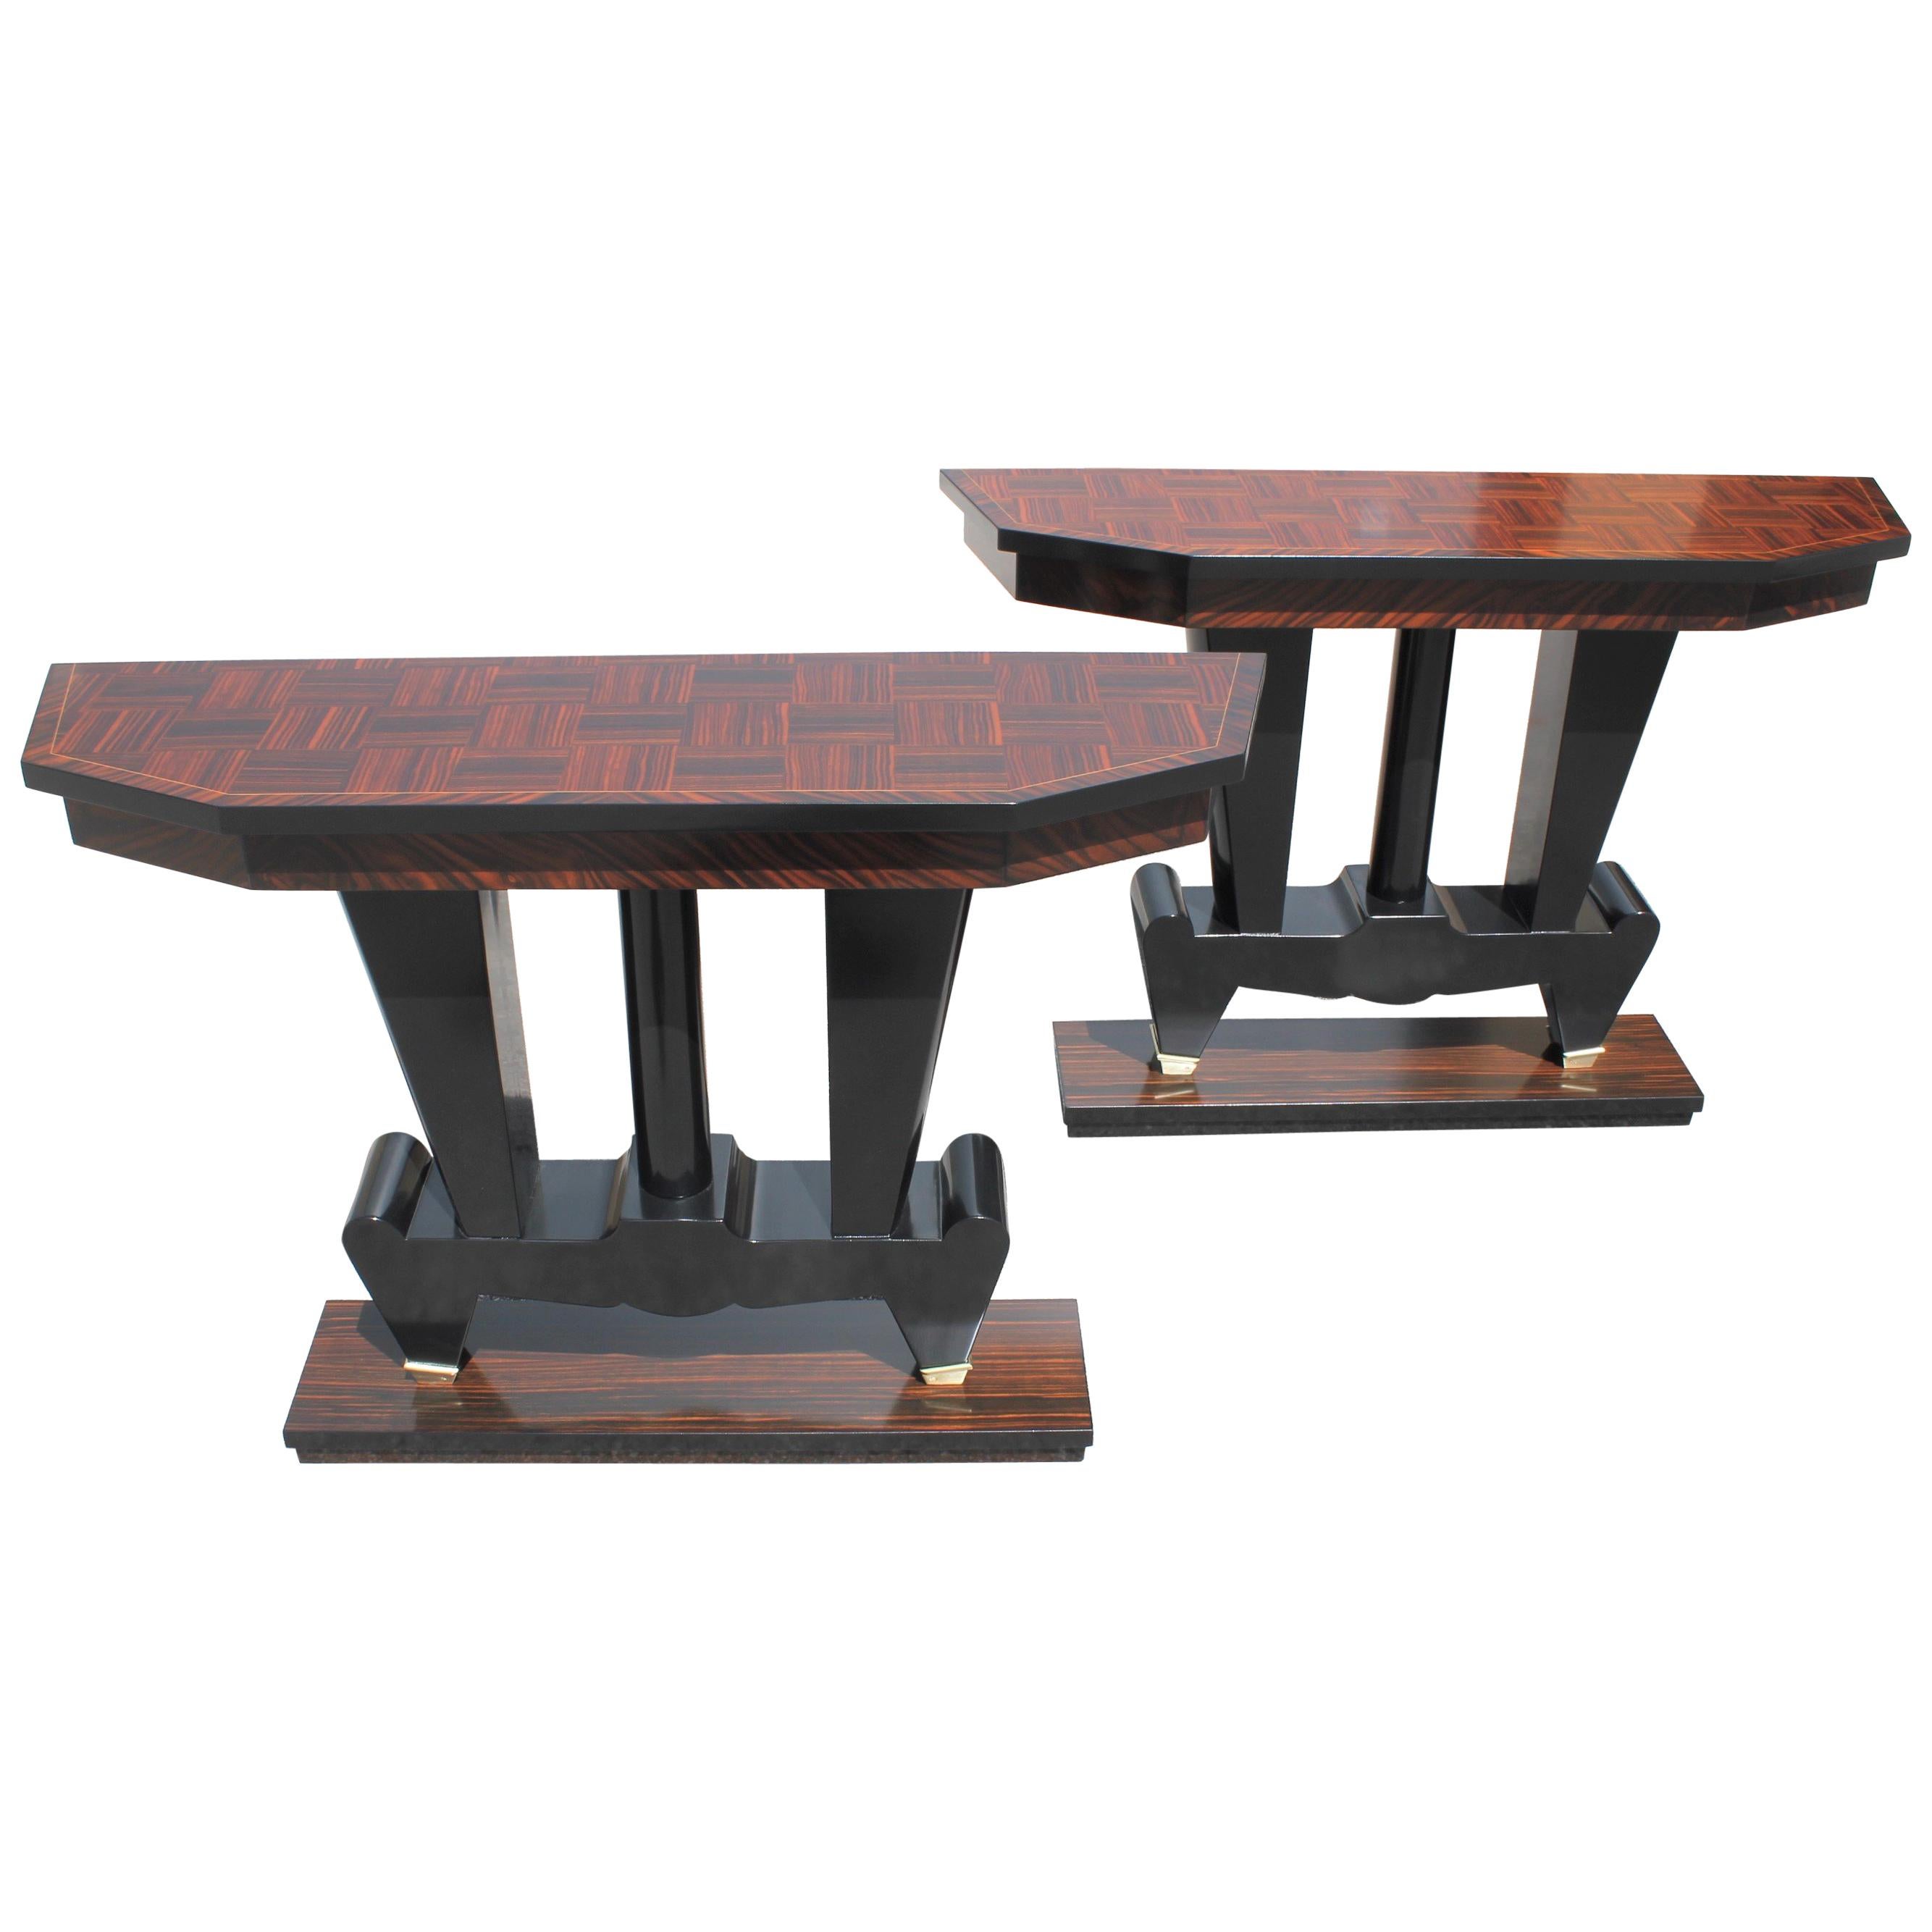 Spectacular Pair of French Art Deco Macassar Ebony Console Tables, circa 1940s